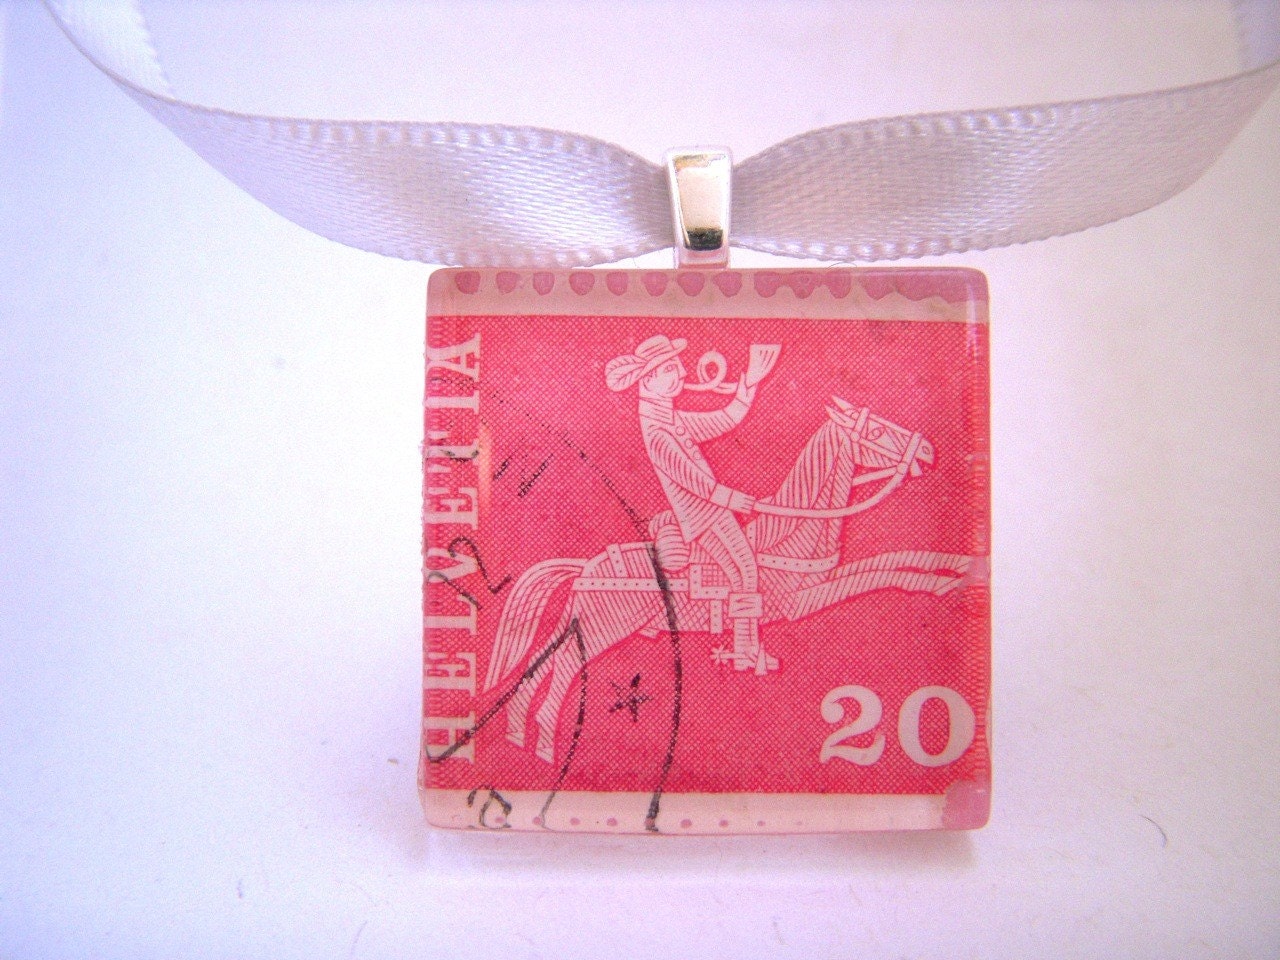 Vintage Swiss Postage Stamp Necklace. Helvetia Cowboy. Handcrafted by Juanitas on Etsy.